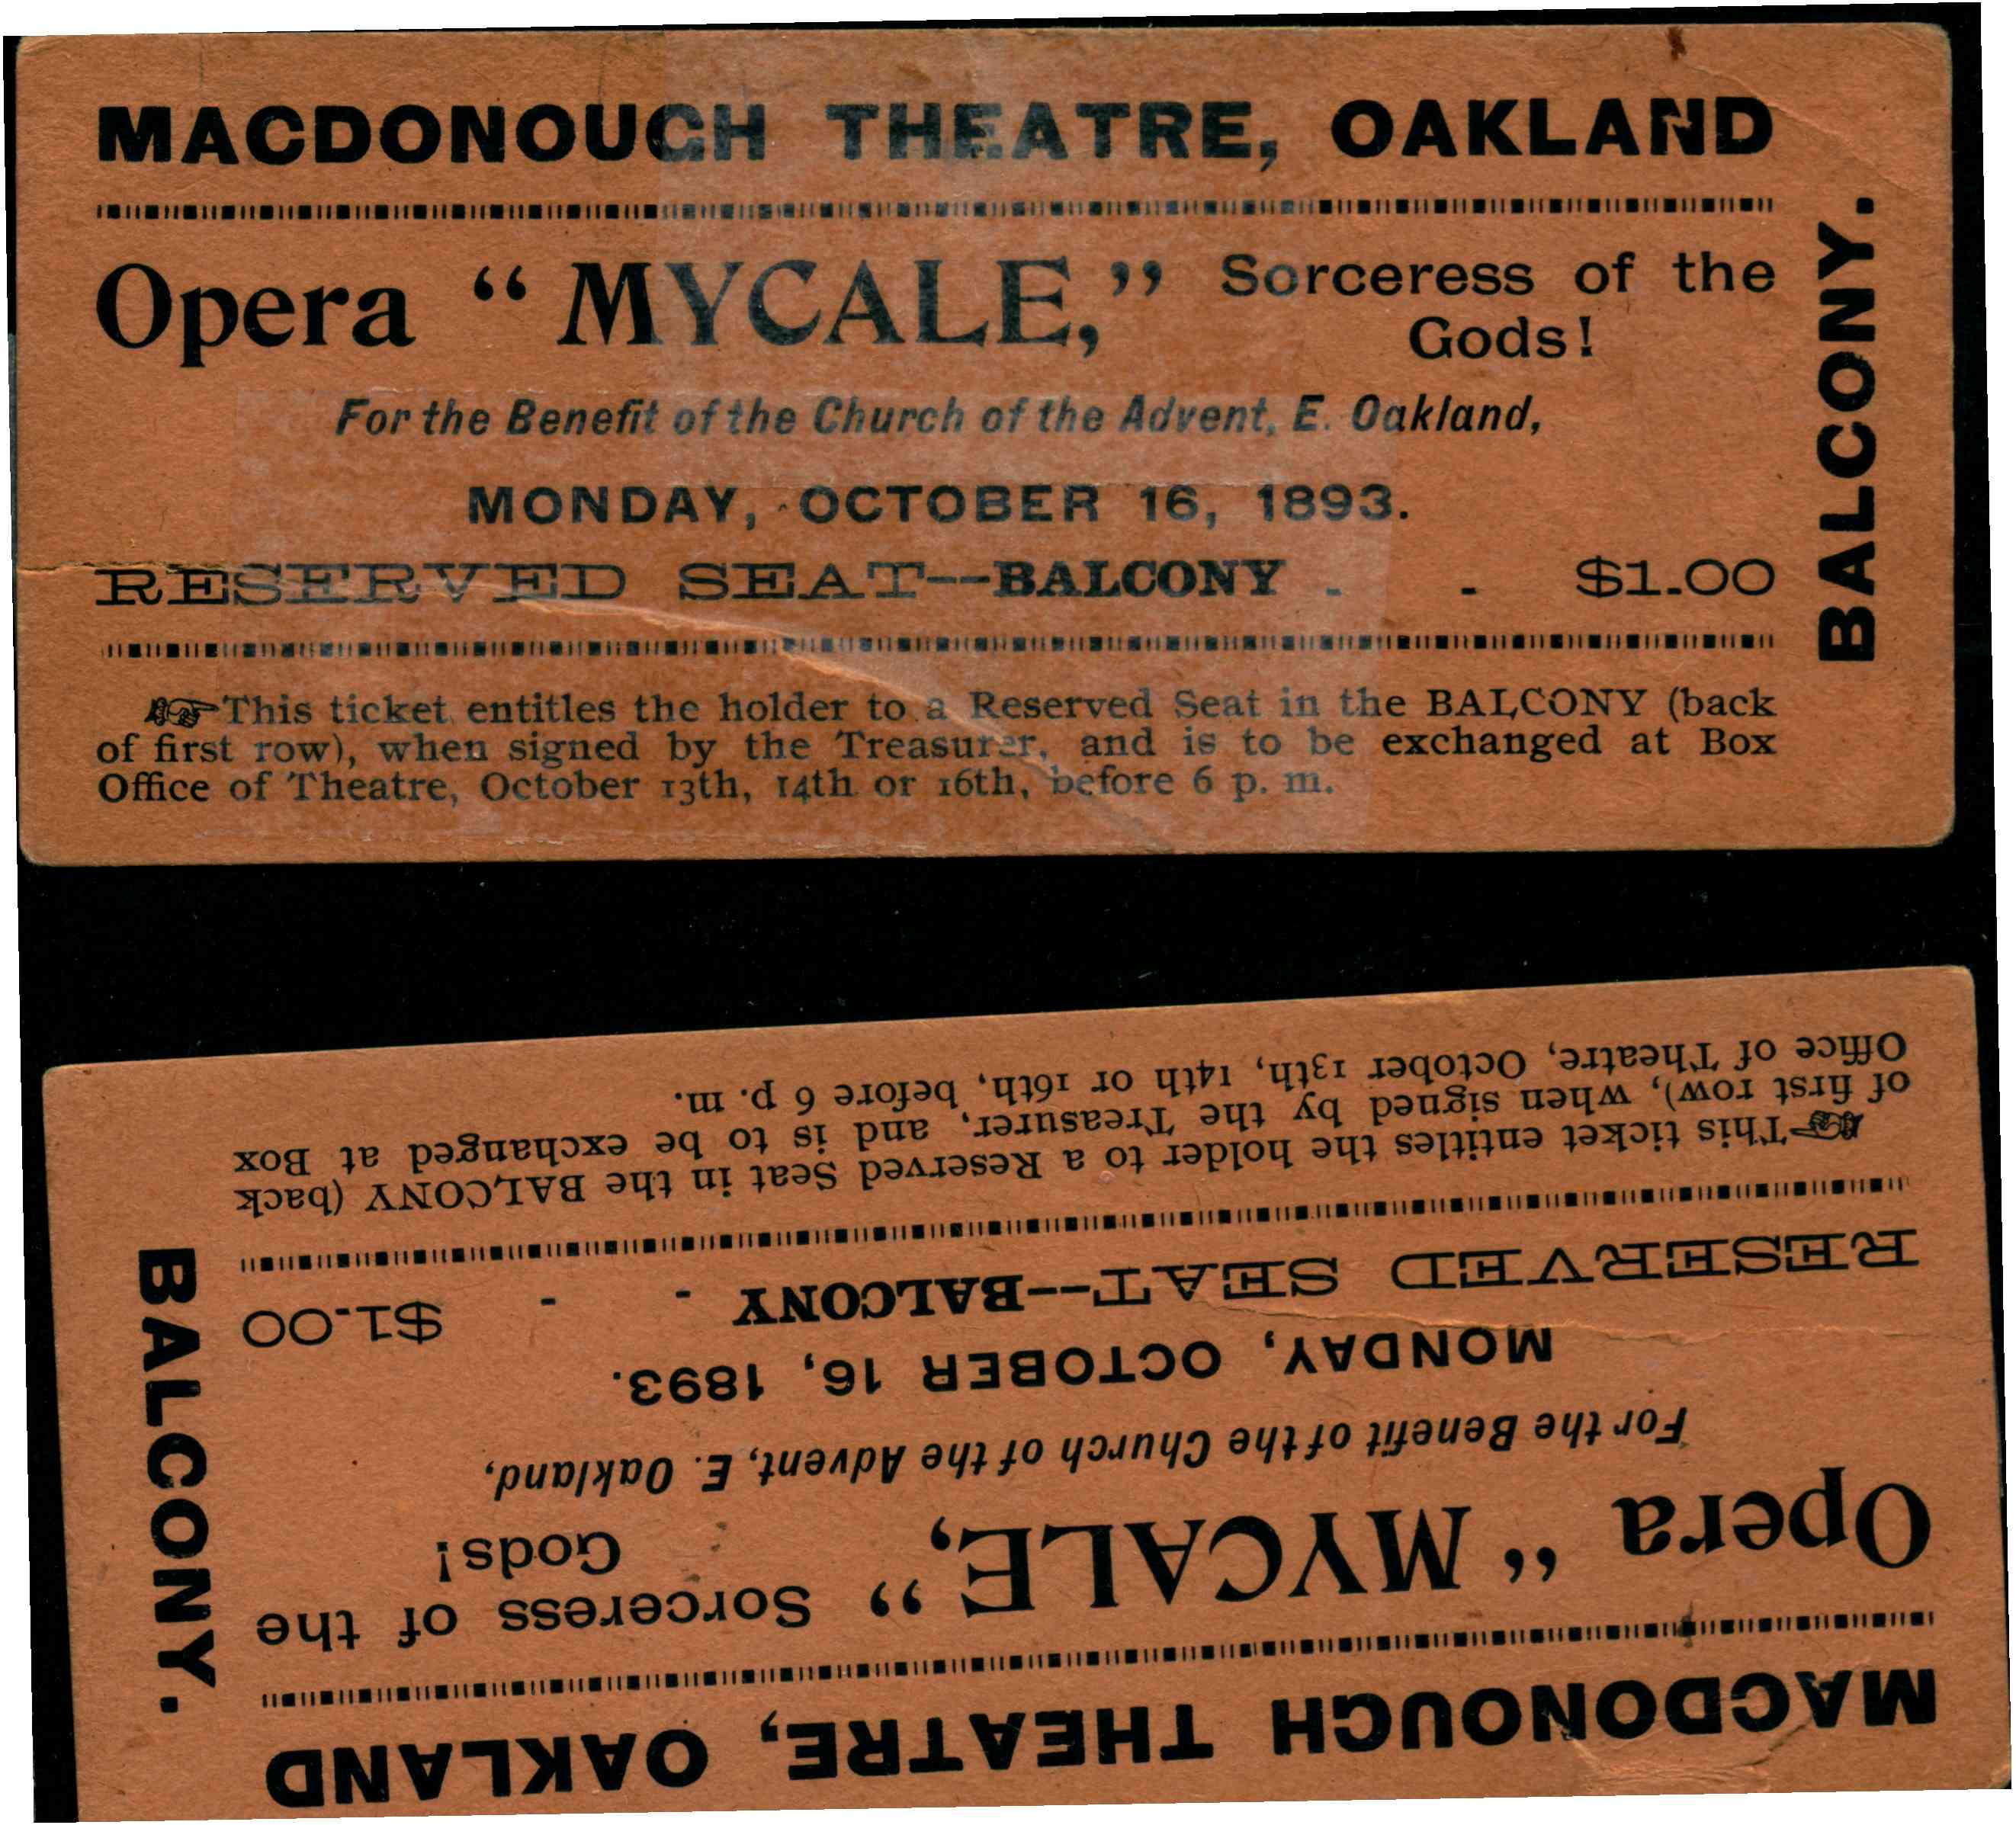 Ticket shows play information